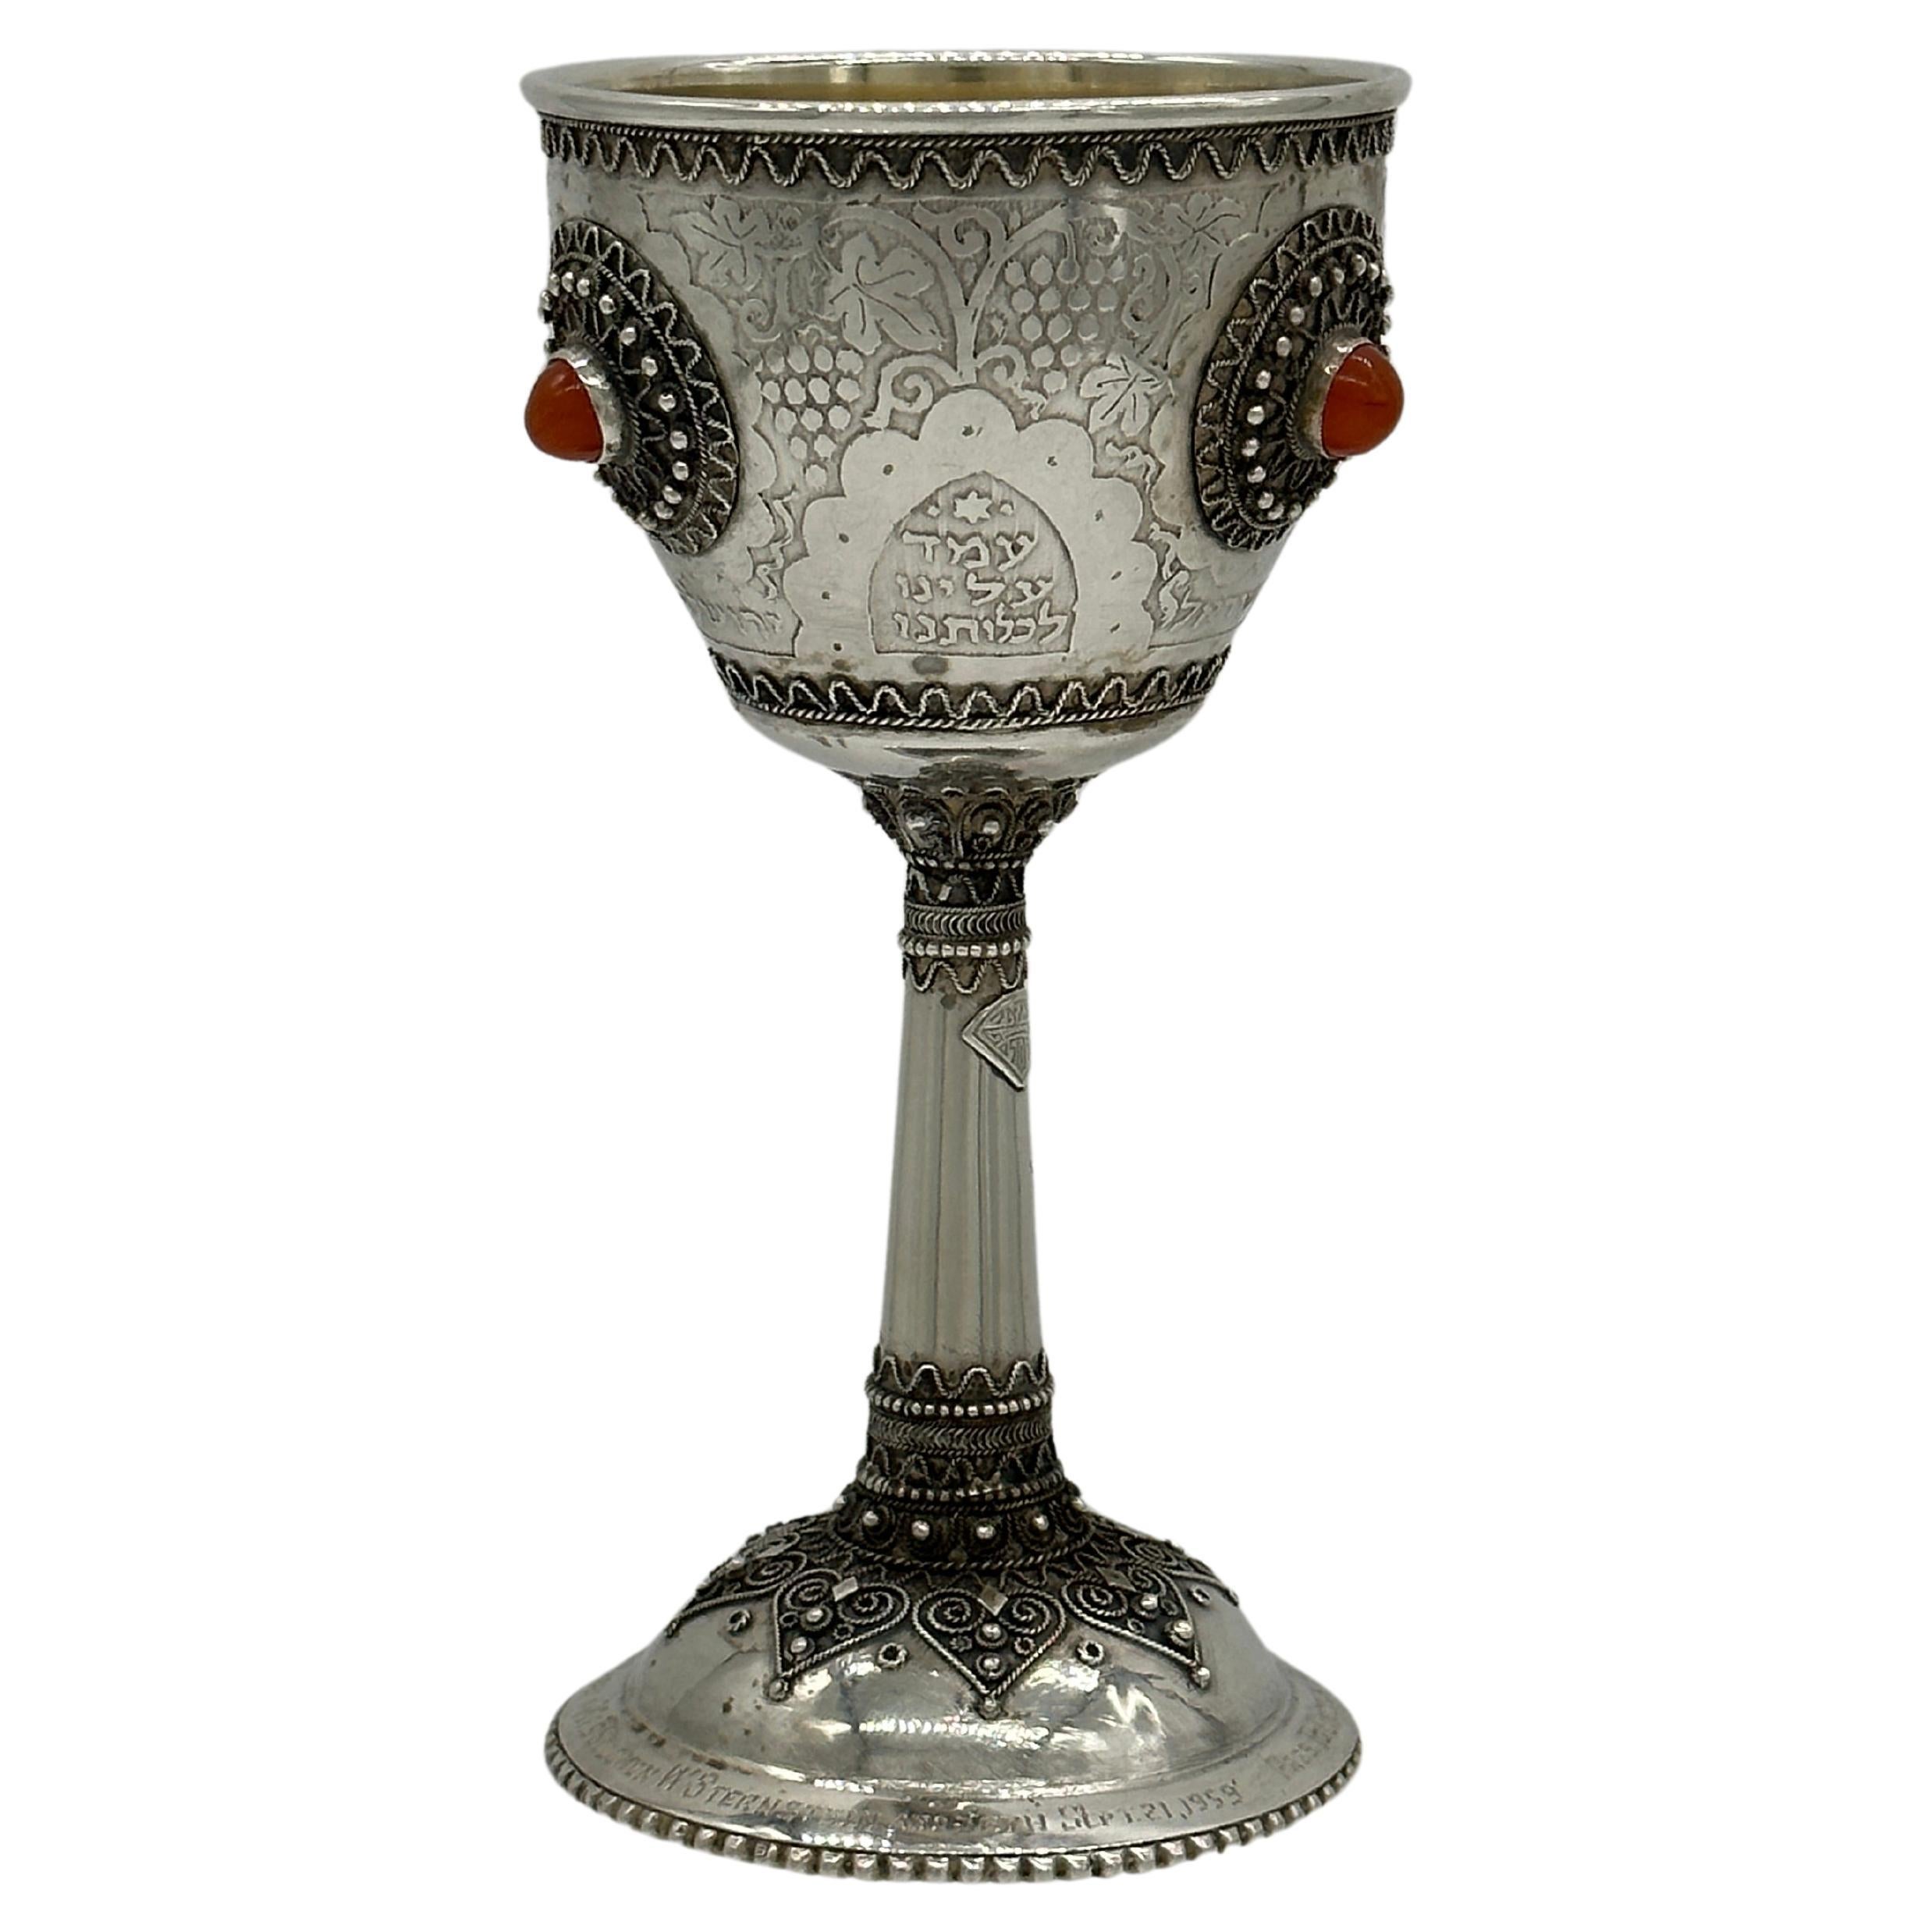 Important Handmade sterling silver Kiddush (eliyahu hanavi cup)  goblet by Bezalel School, Jerusalem, circa 1948.  On round base decorated with silver filigree and Cabouchon shaped orange agate applications.  The base stem with Bezalel mark. The